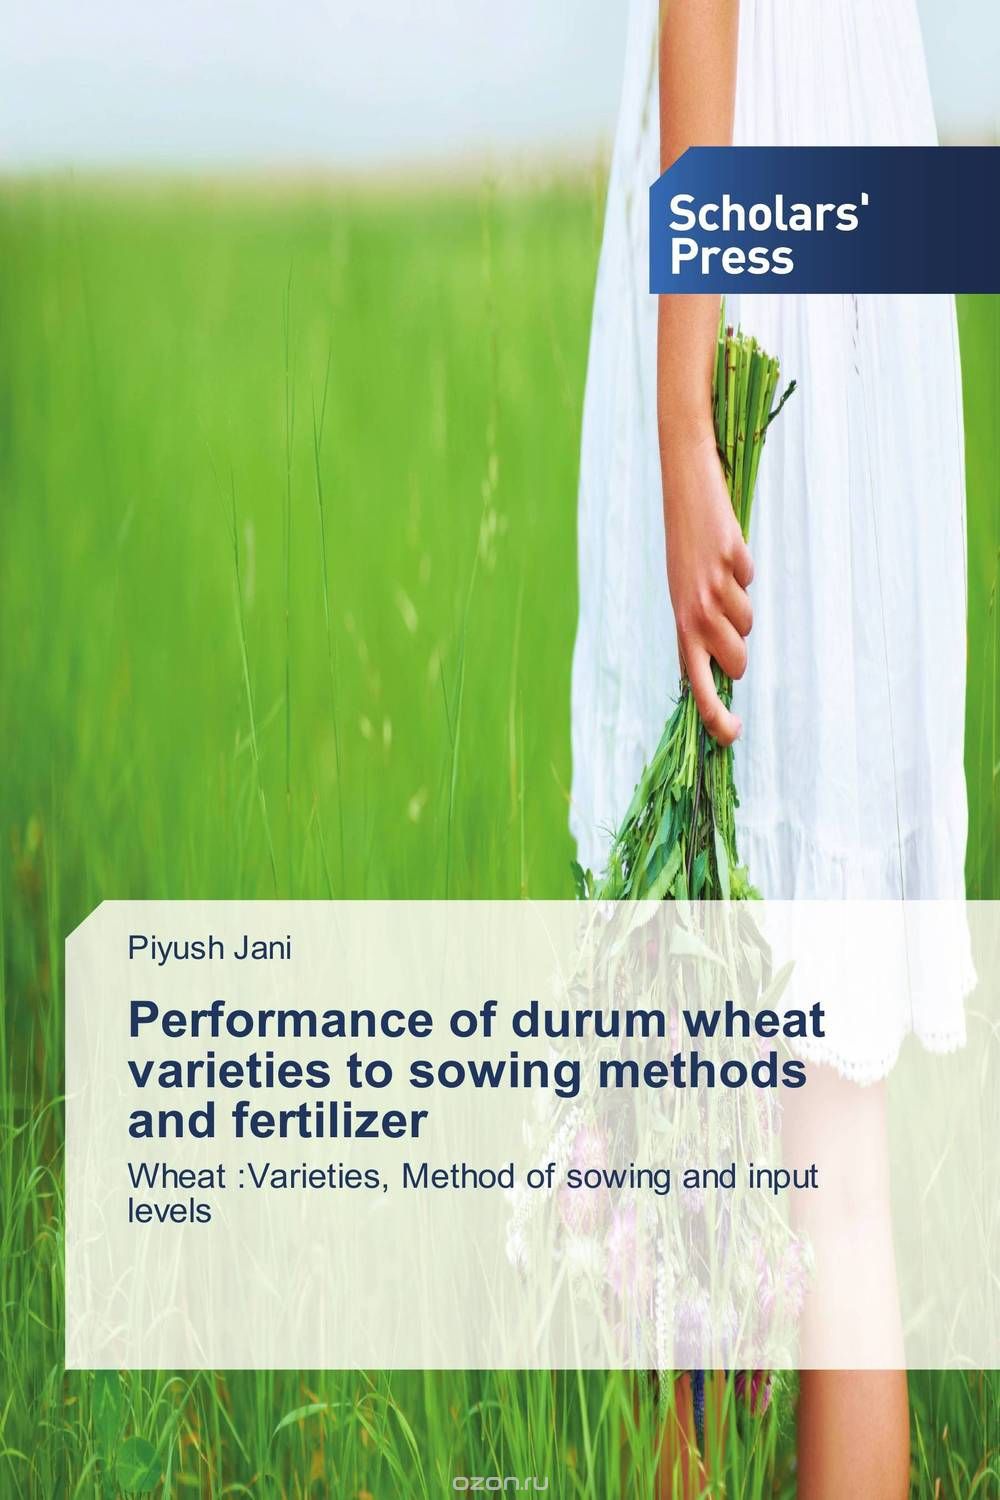 Performance of durum wheat varieties to sowing methods and fertilizer